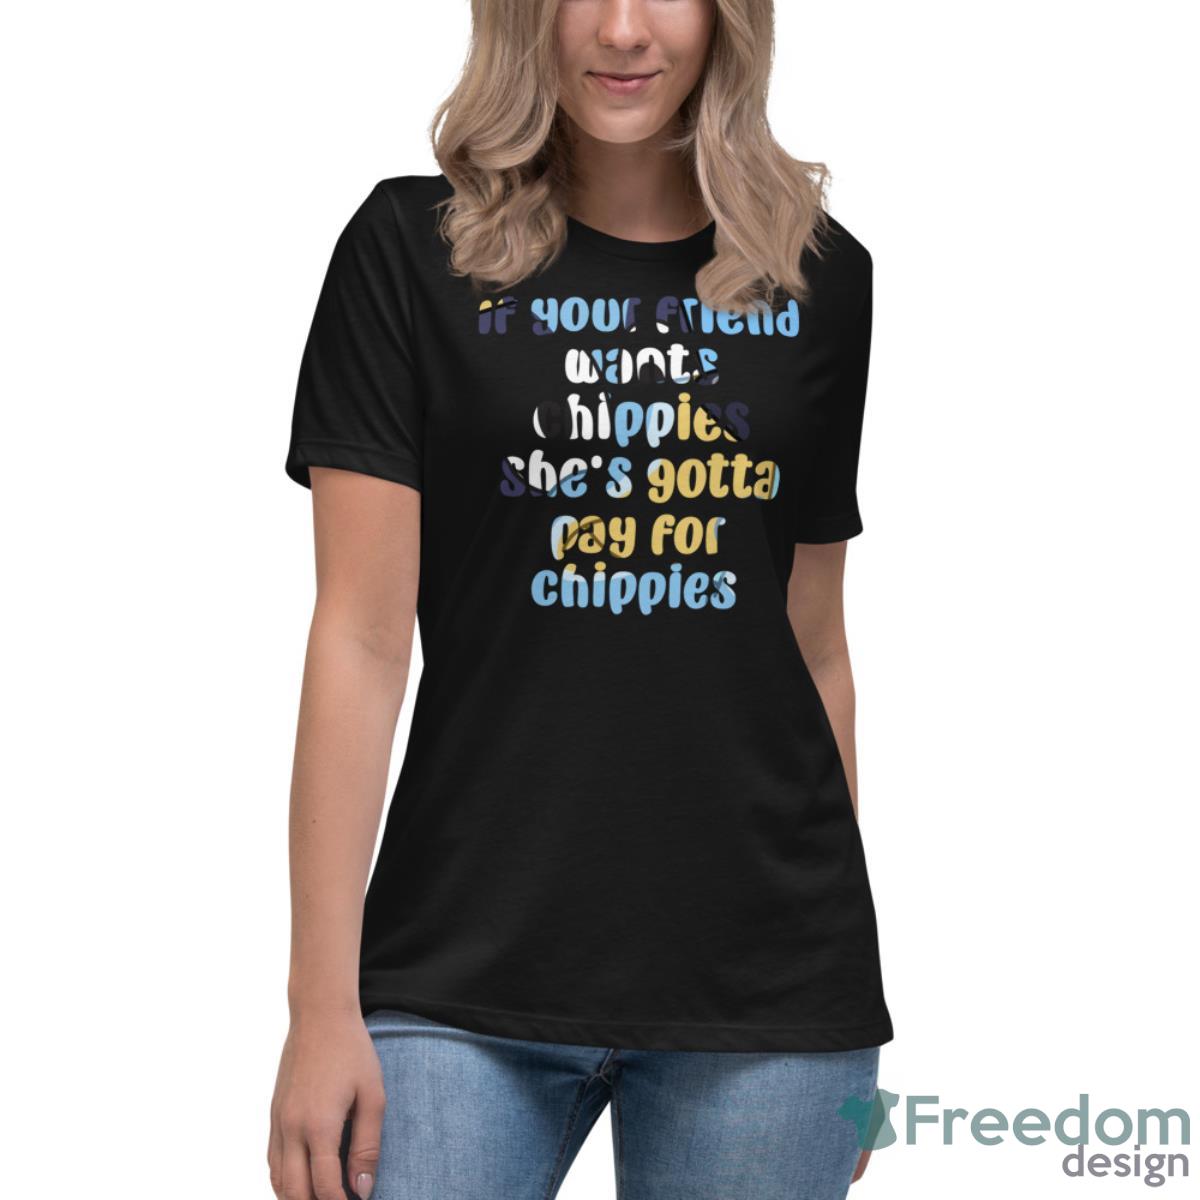 Bluey Dad If your friend wants chippies, she's gotta pay for chippies T Shirt